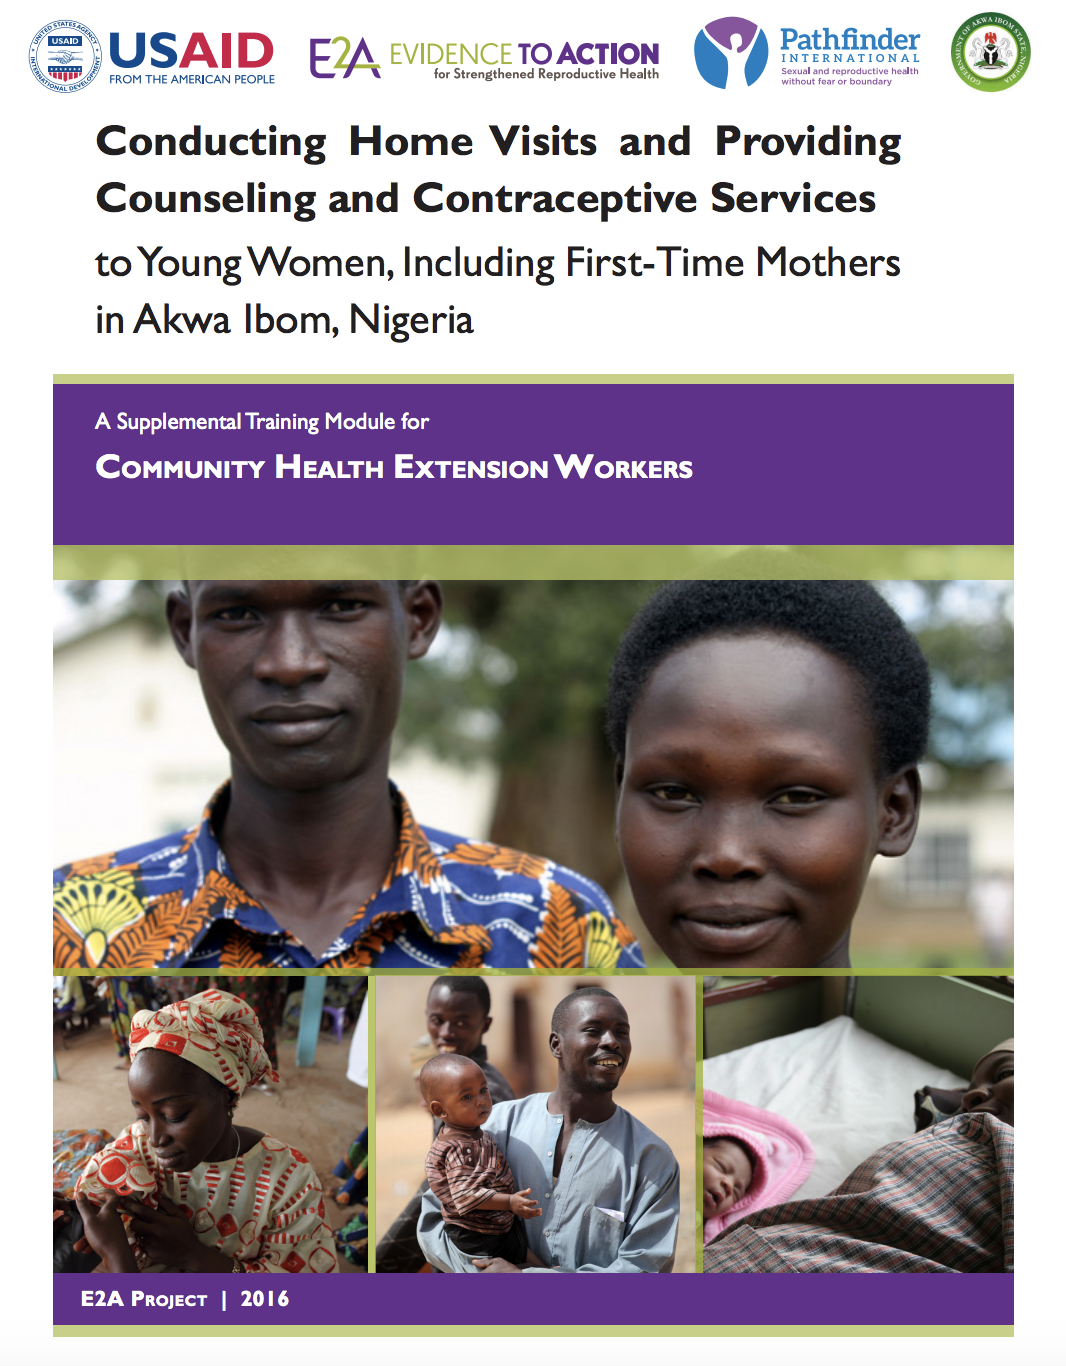 Conducting Home Visits and Providing Counseling and Contraceptive Services